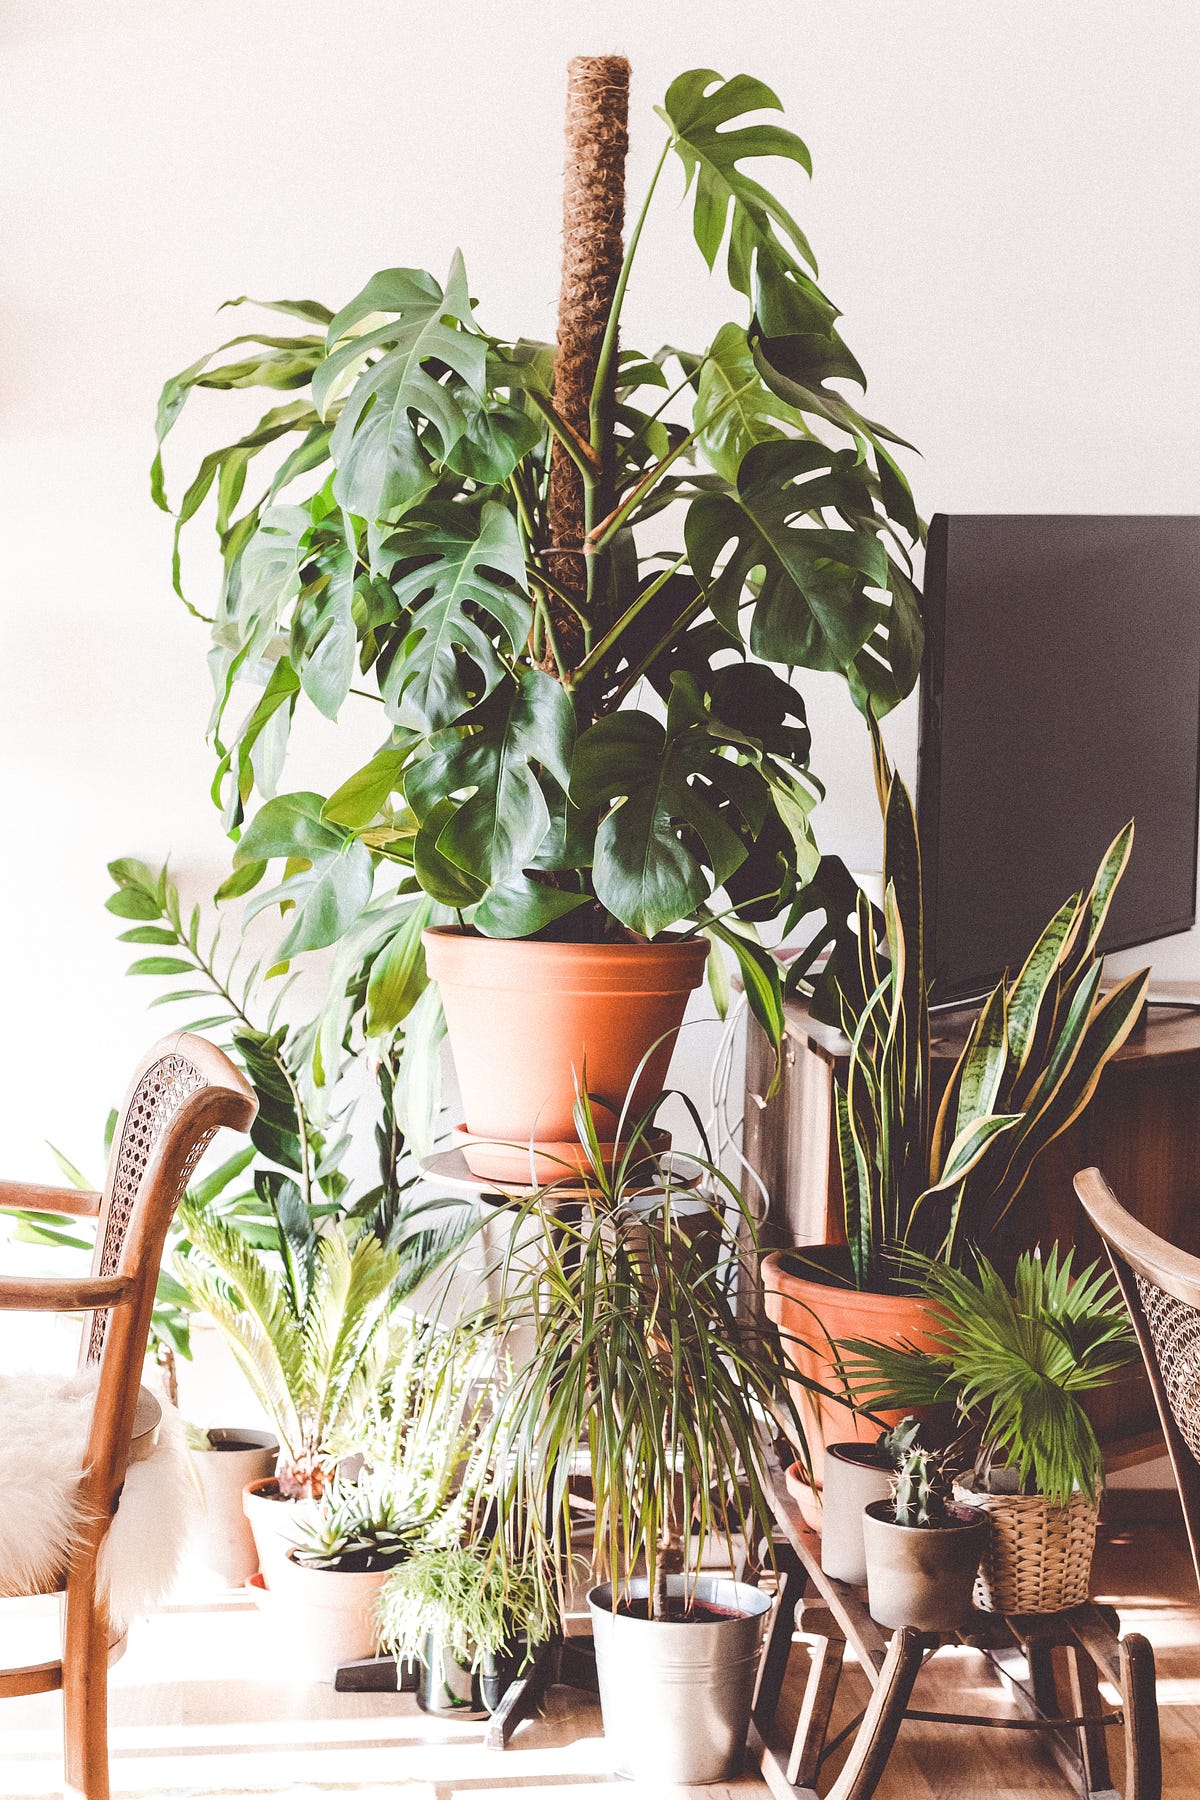 How a House Plant Can Help You Understand Sobriety | by Kelly Tompkins